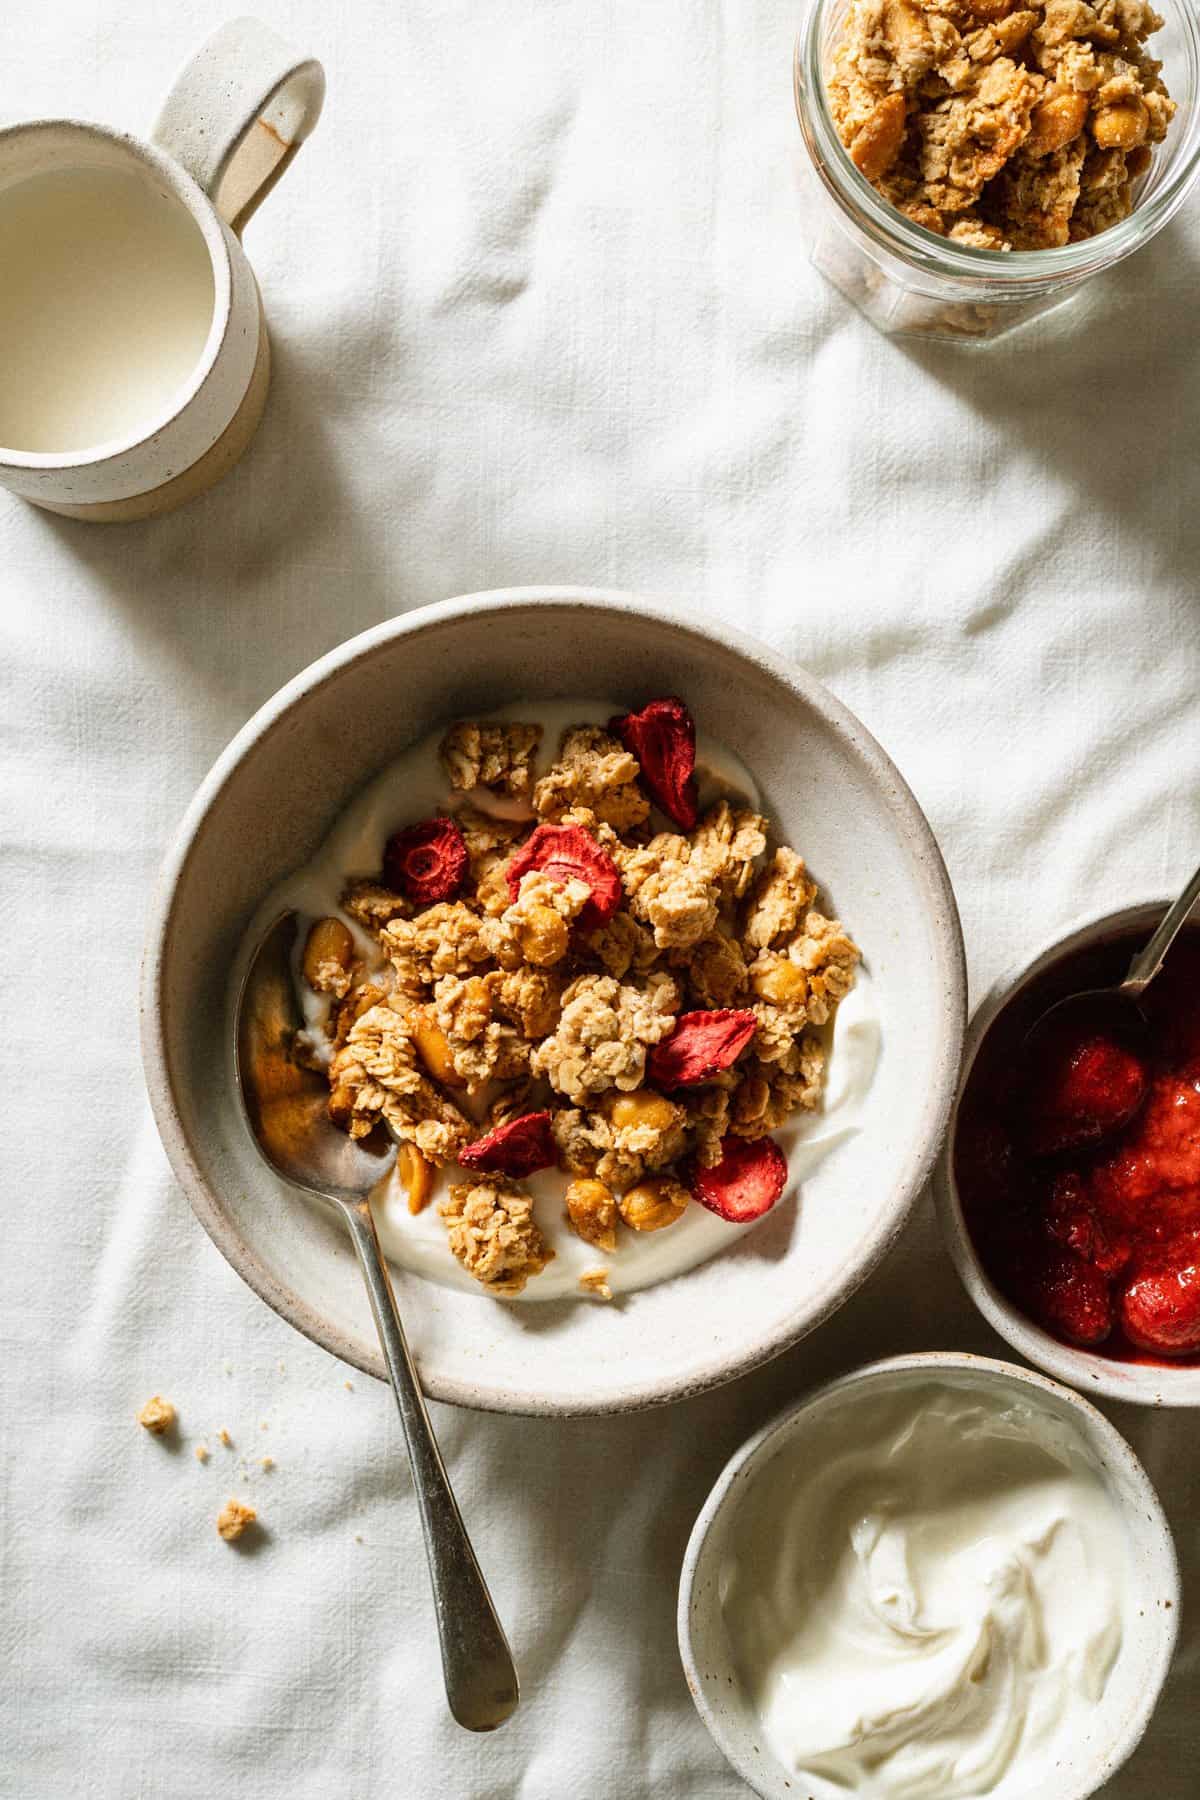 A morning breakfast scene with a bowl of granola served on yoghurt with a spoon and some compote in a dish to the side.